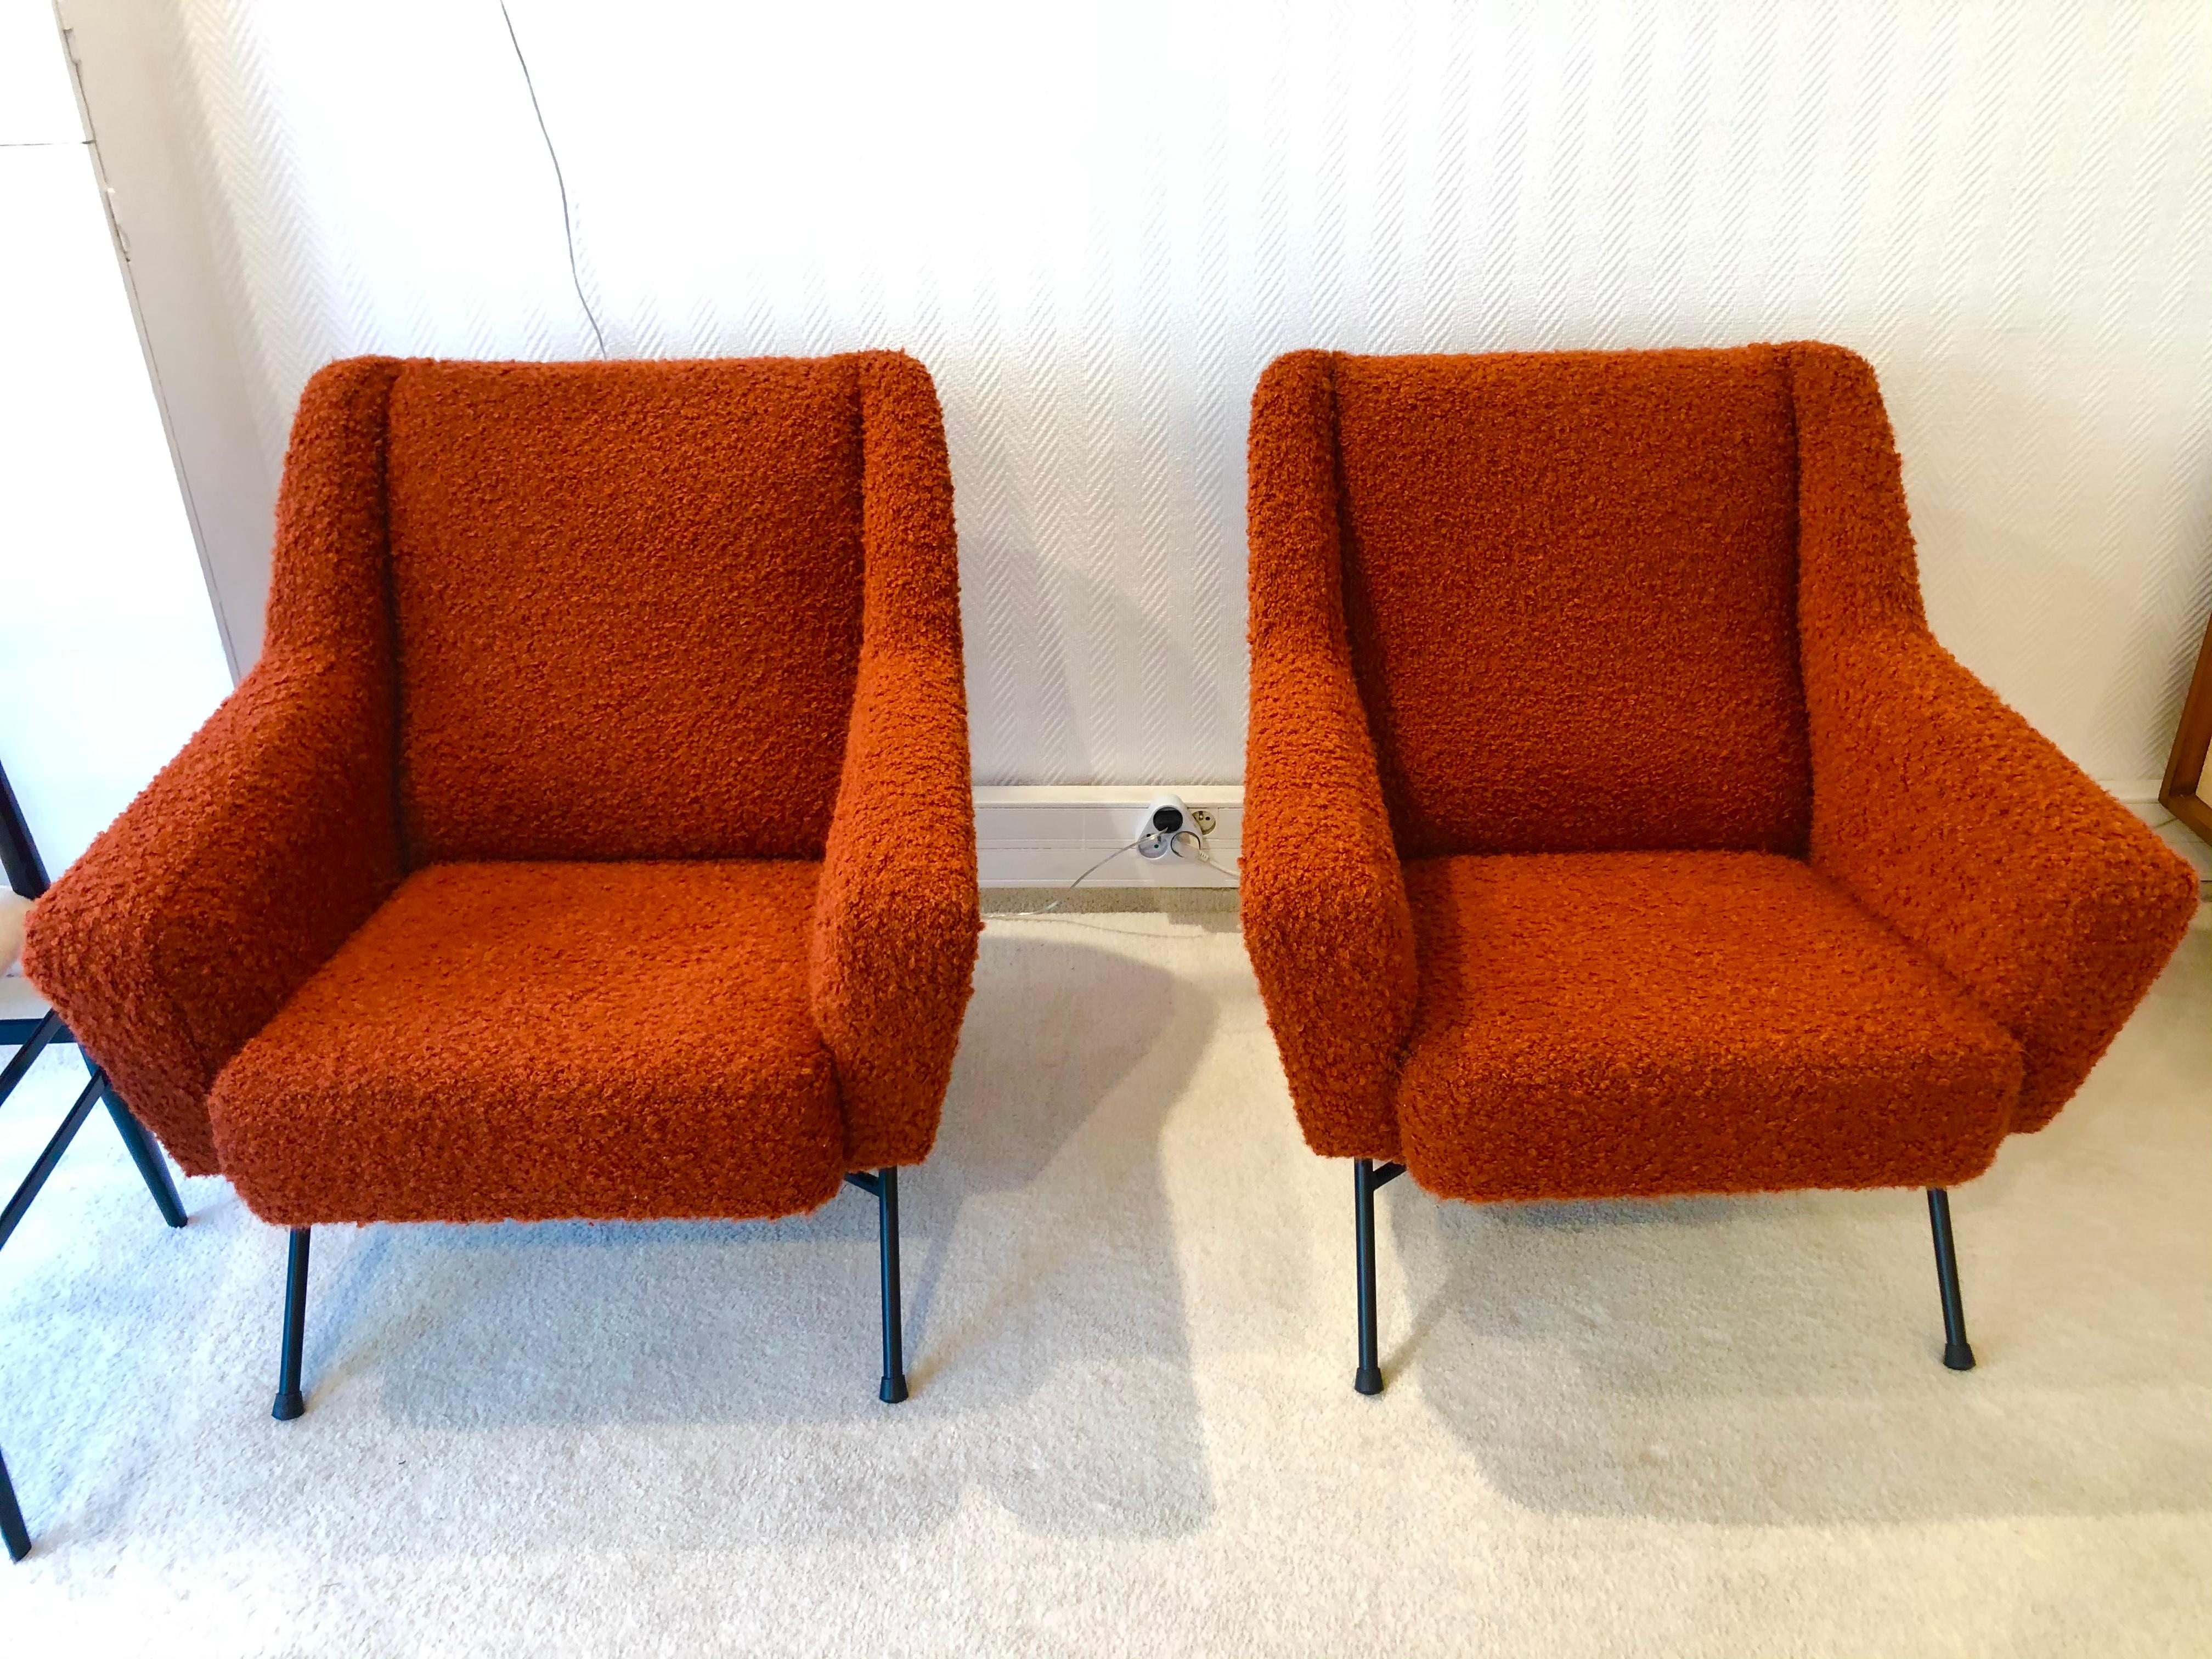 20th Century Pair of Armchairs by Dangles et Defrance 1950